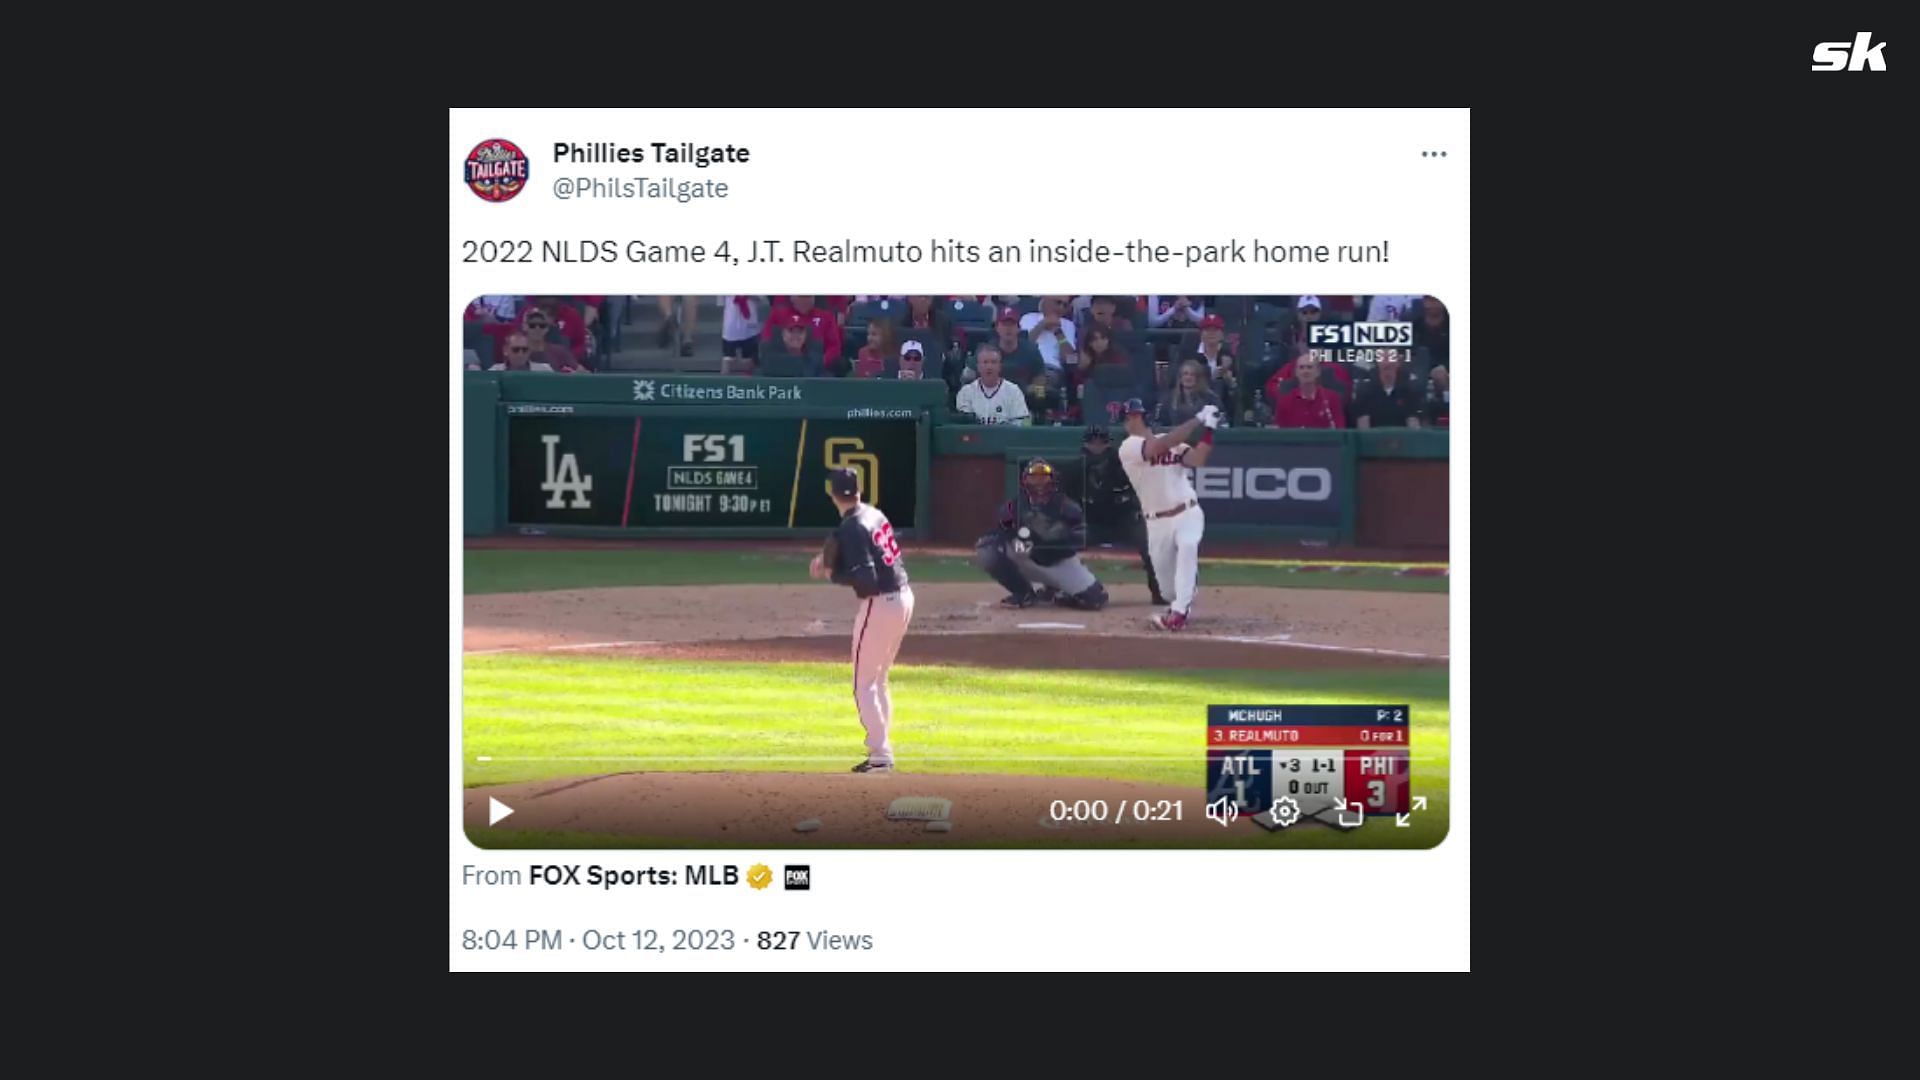 Realmuto hits an inside-the-park home run during the 2022 NLDS against the Braves.